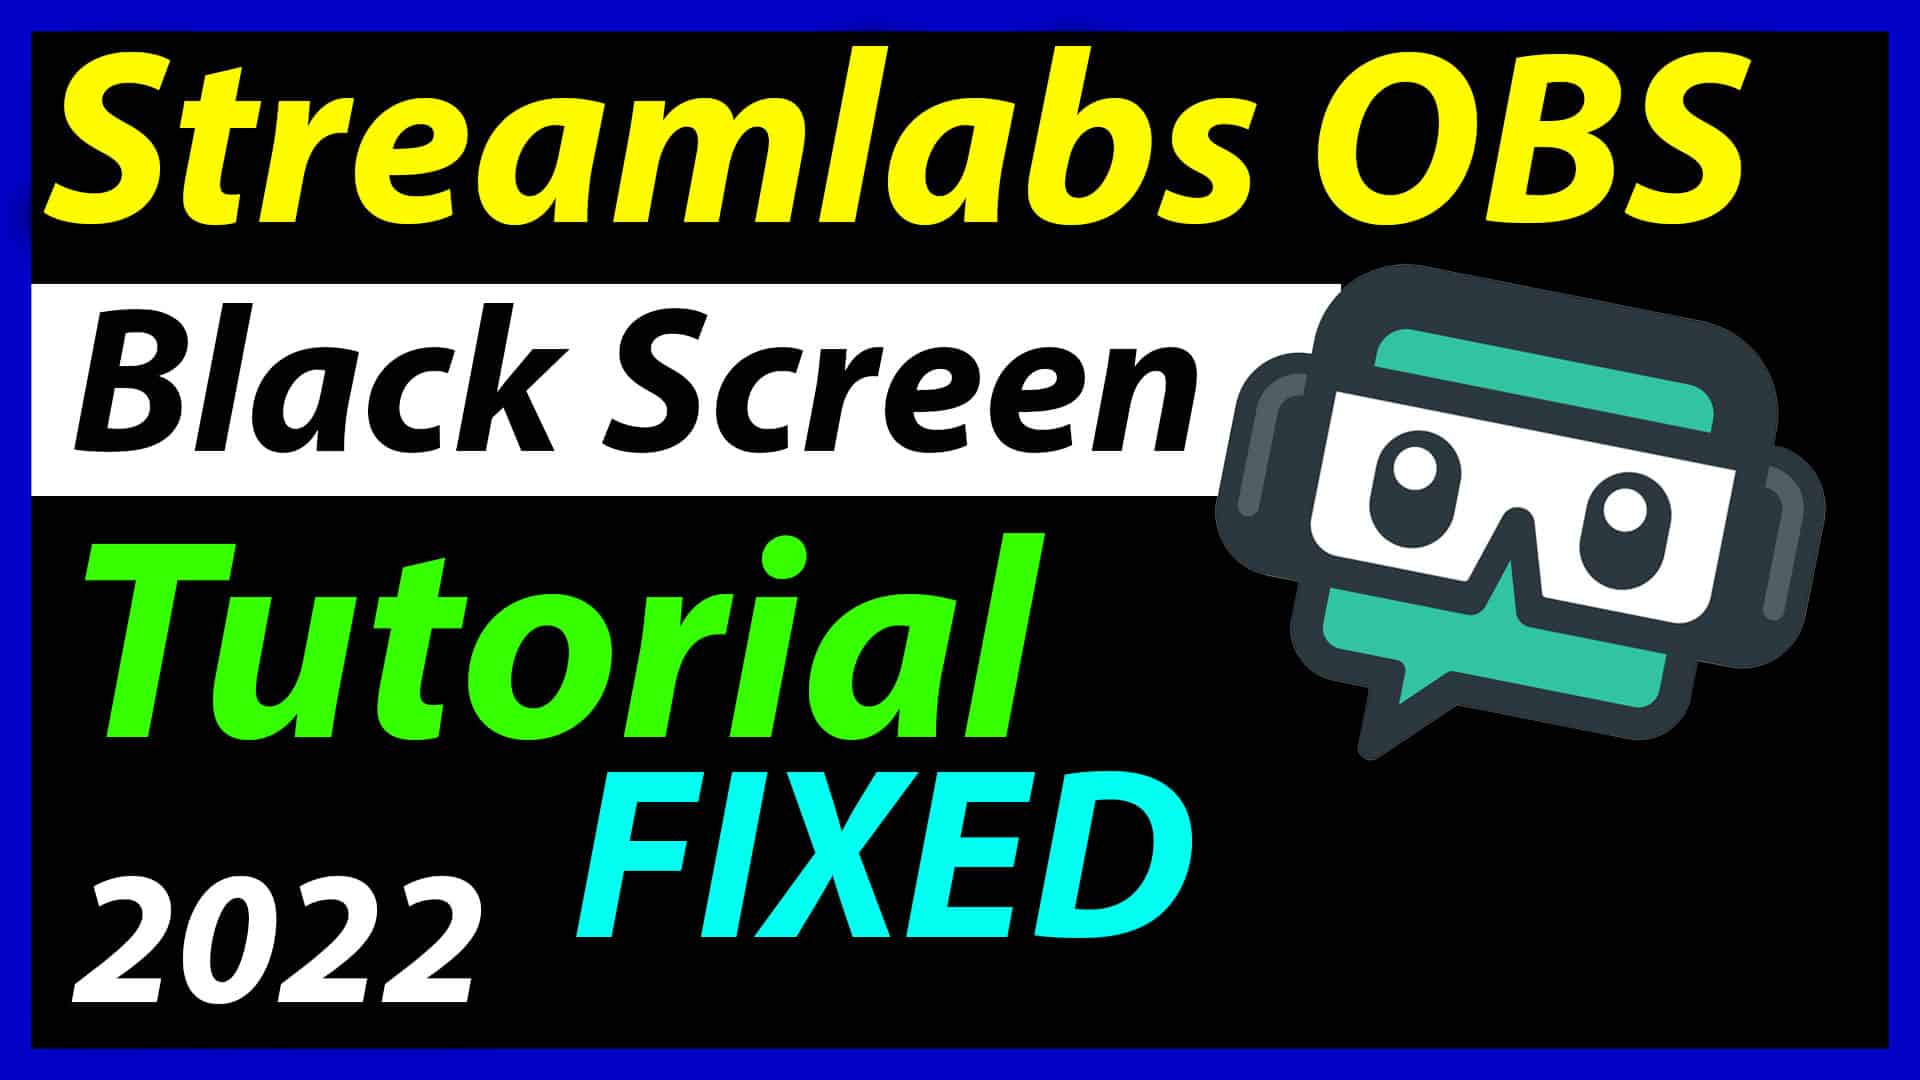 How to fix Streamlabs OBS Black Screen Problem Fixed 2022